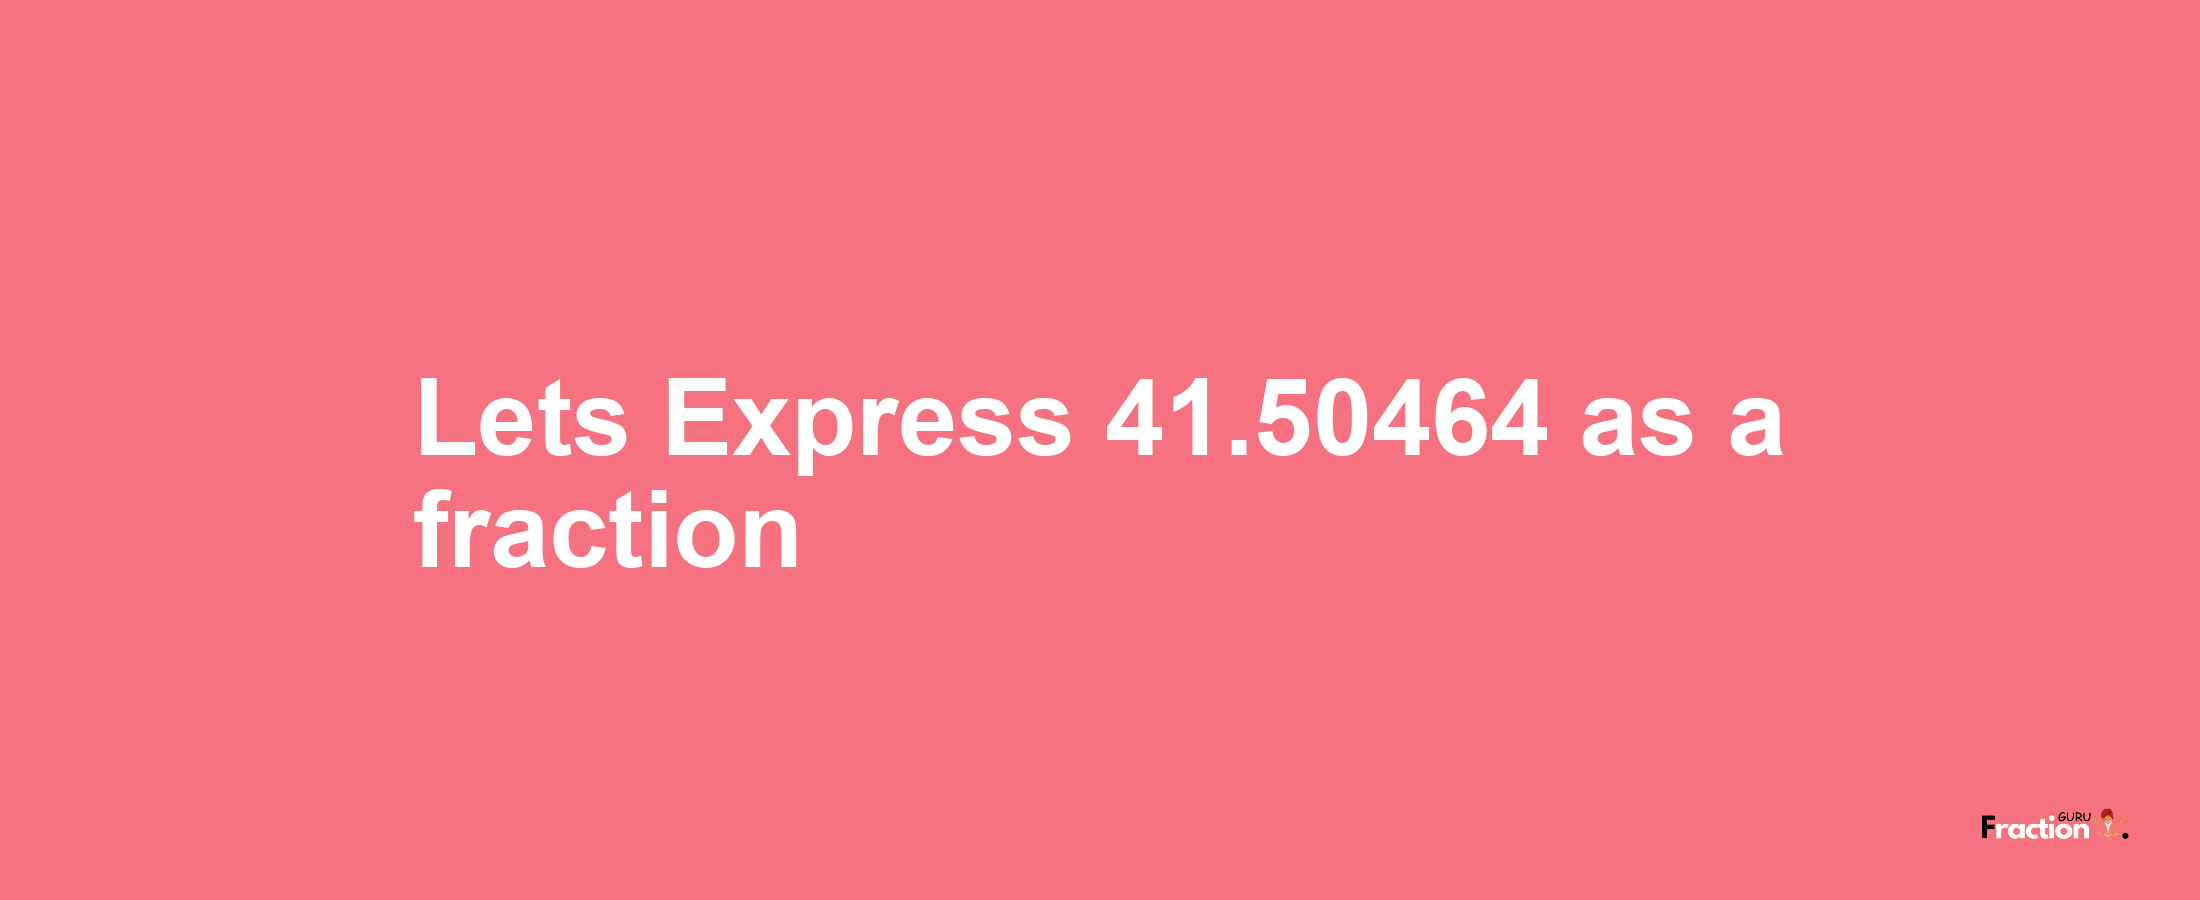 Lets Express 41.50464 as afraction